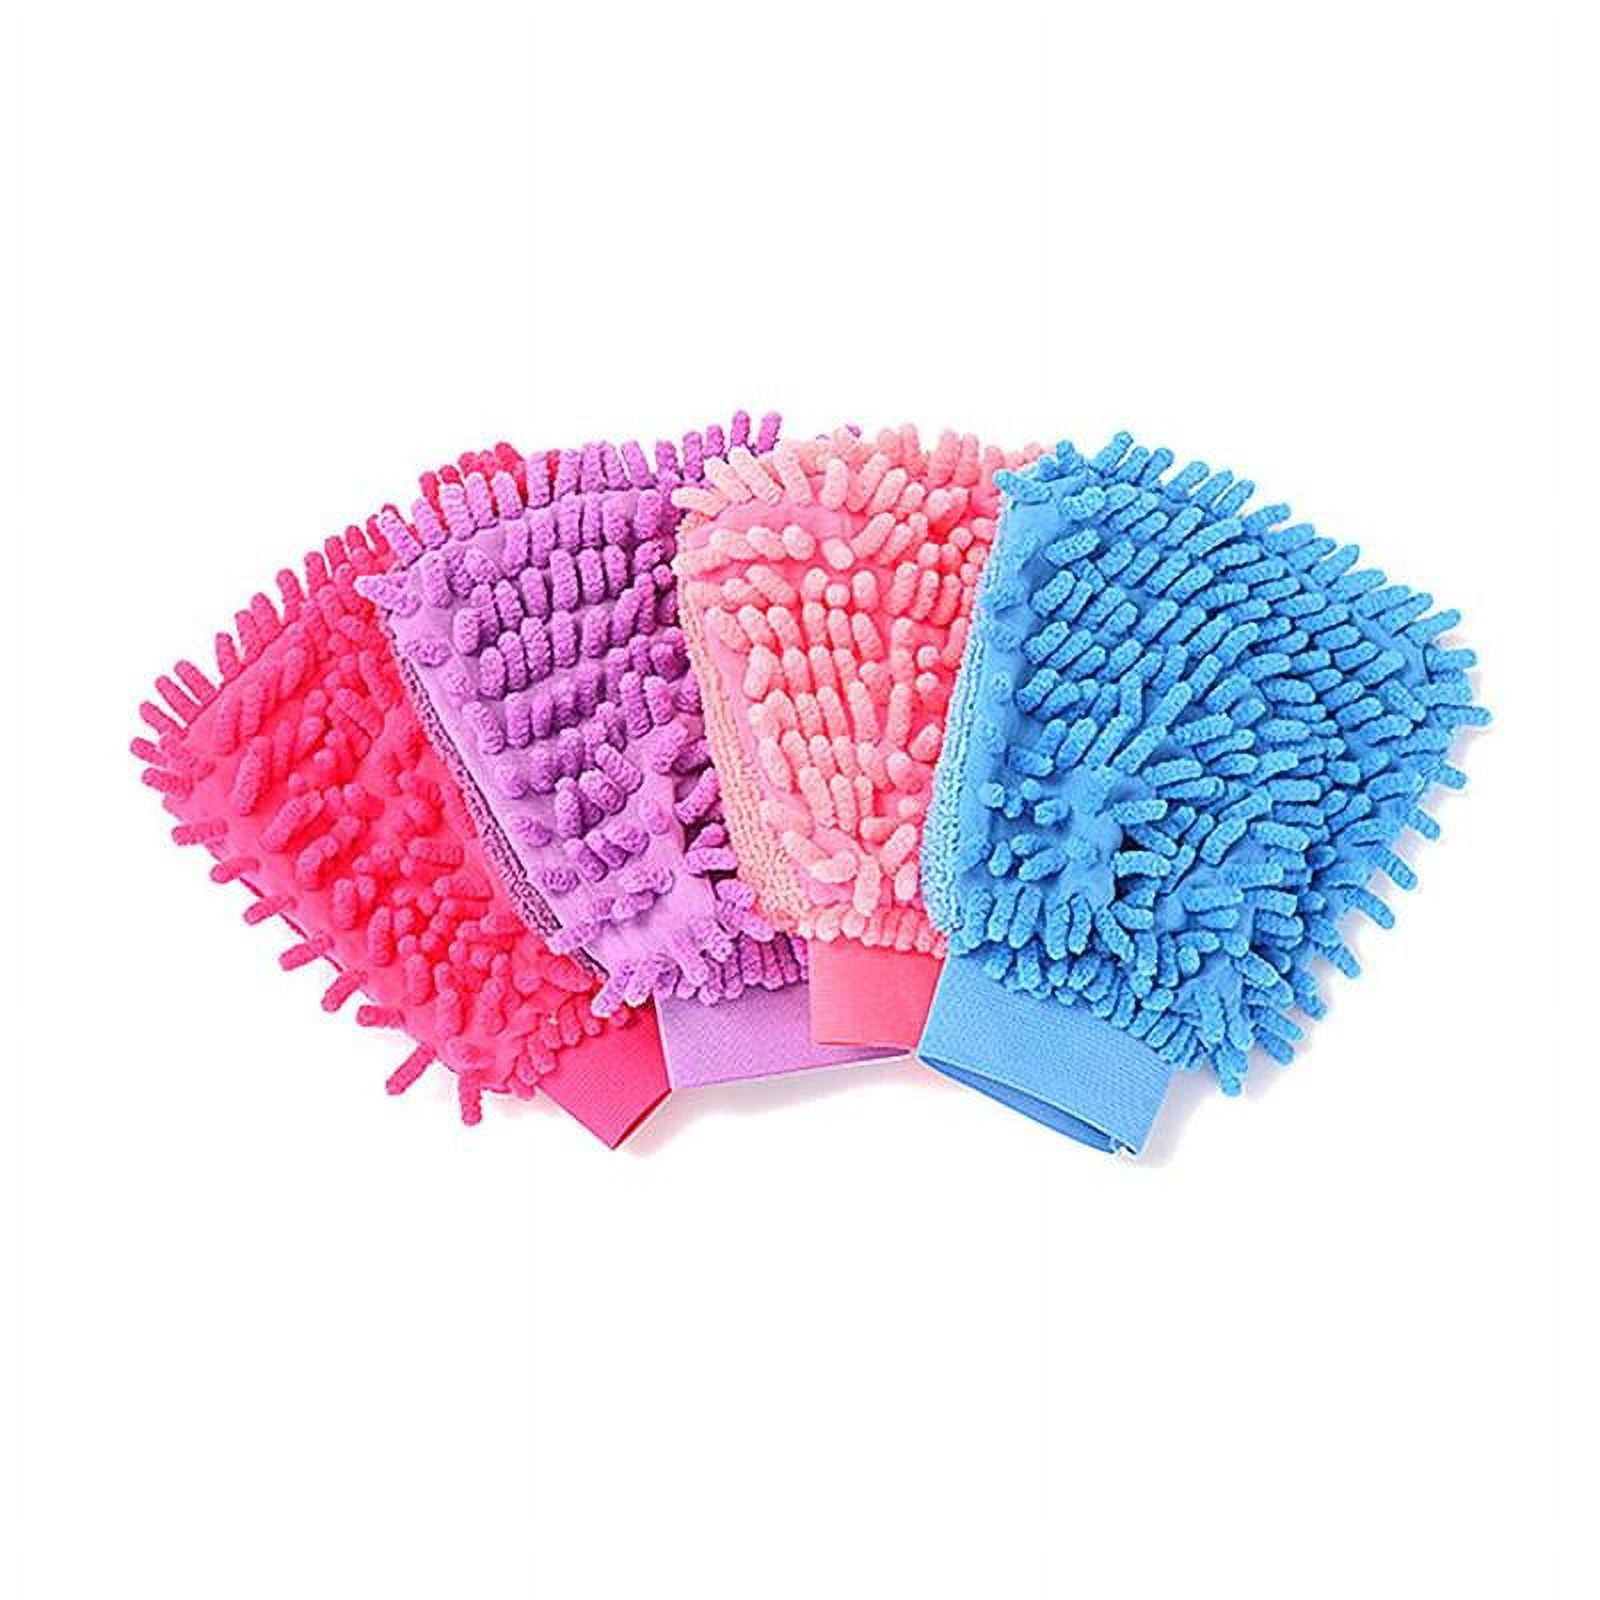 BesMelody House Cleaning and Car Washing Gloves, Home Dusting Microfiber  Mitts, Wash Clean Polish Faster (2-Pack, Pink/Blue)